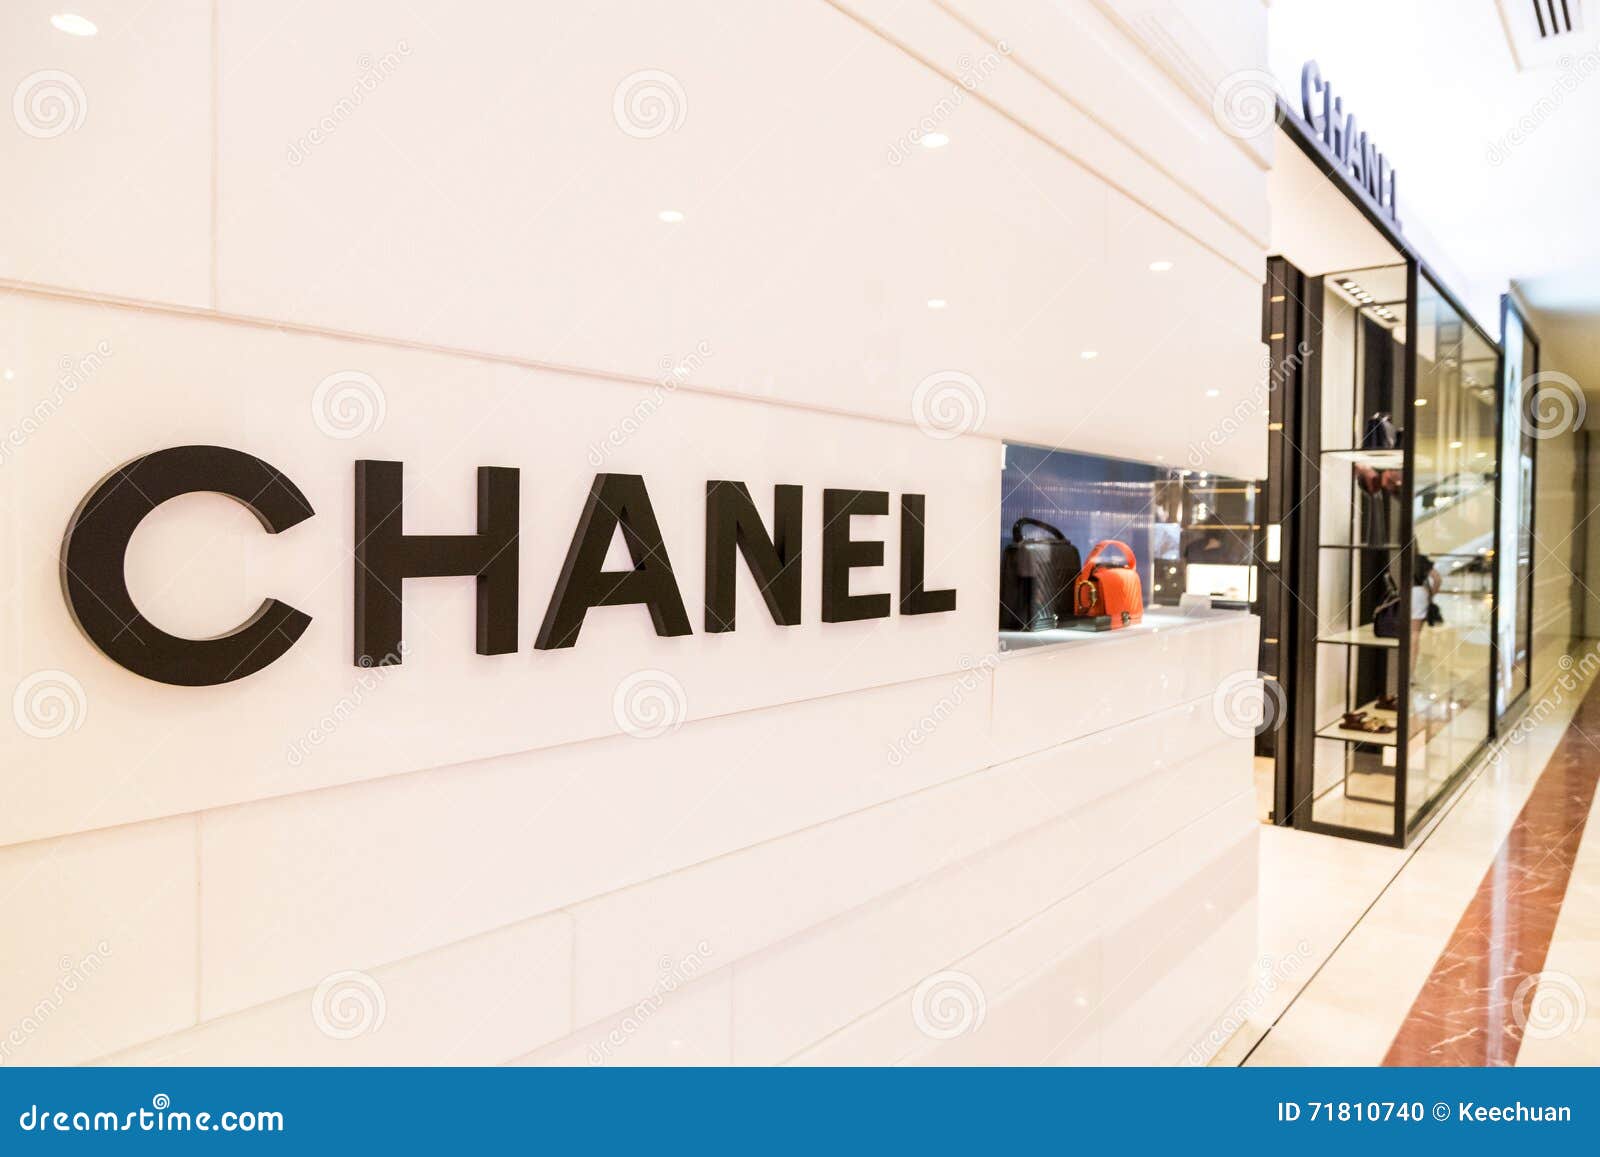 Where can I find a Chanel bag outlet store in the USA  Quora